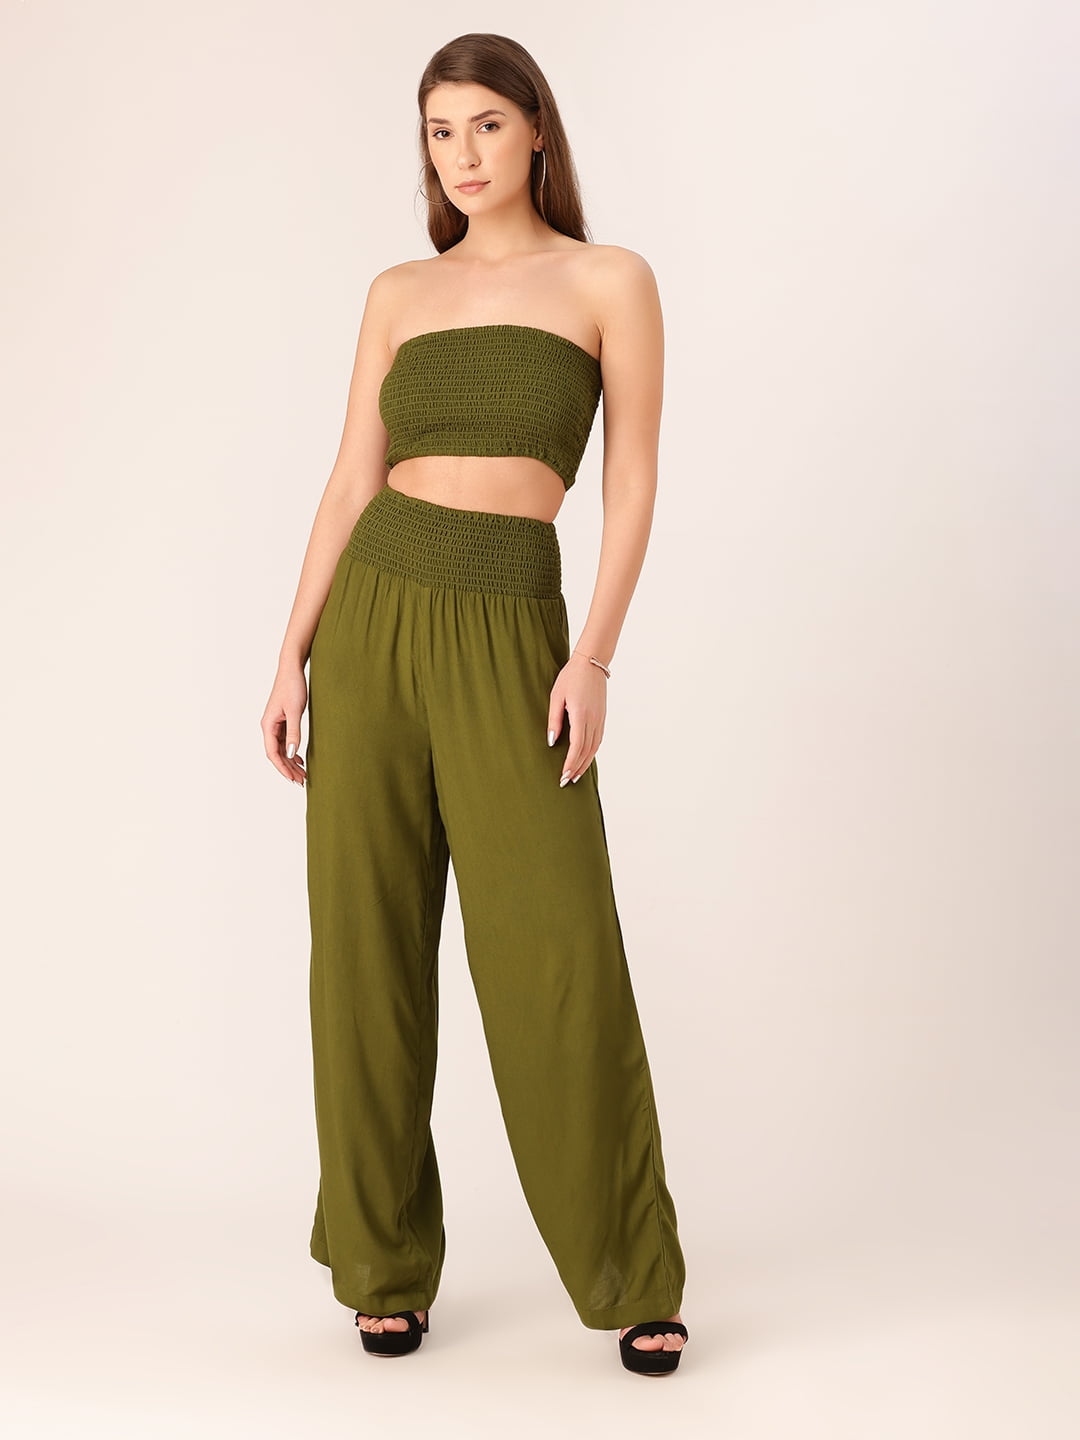 sexy party wear palazzo pants online for ladies | Women Clothing - Lurap.com